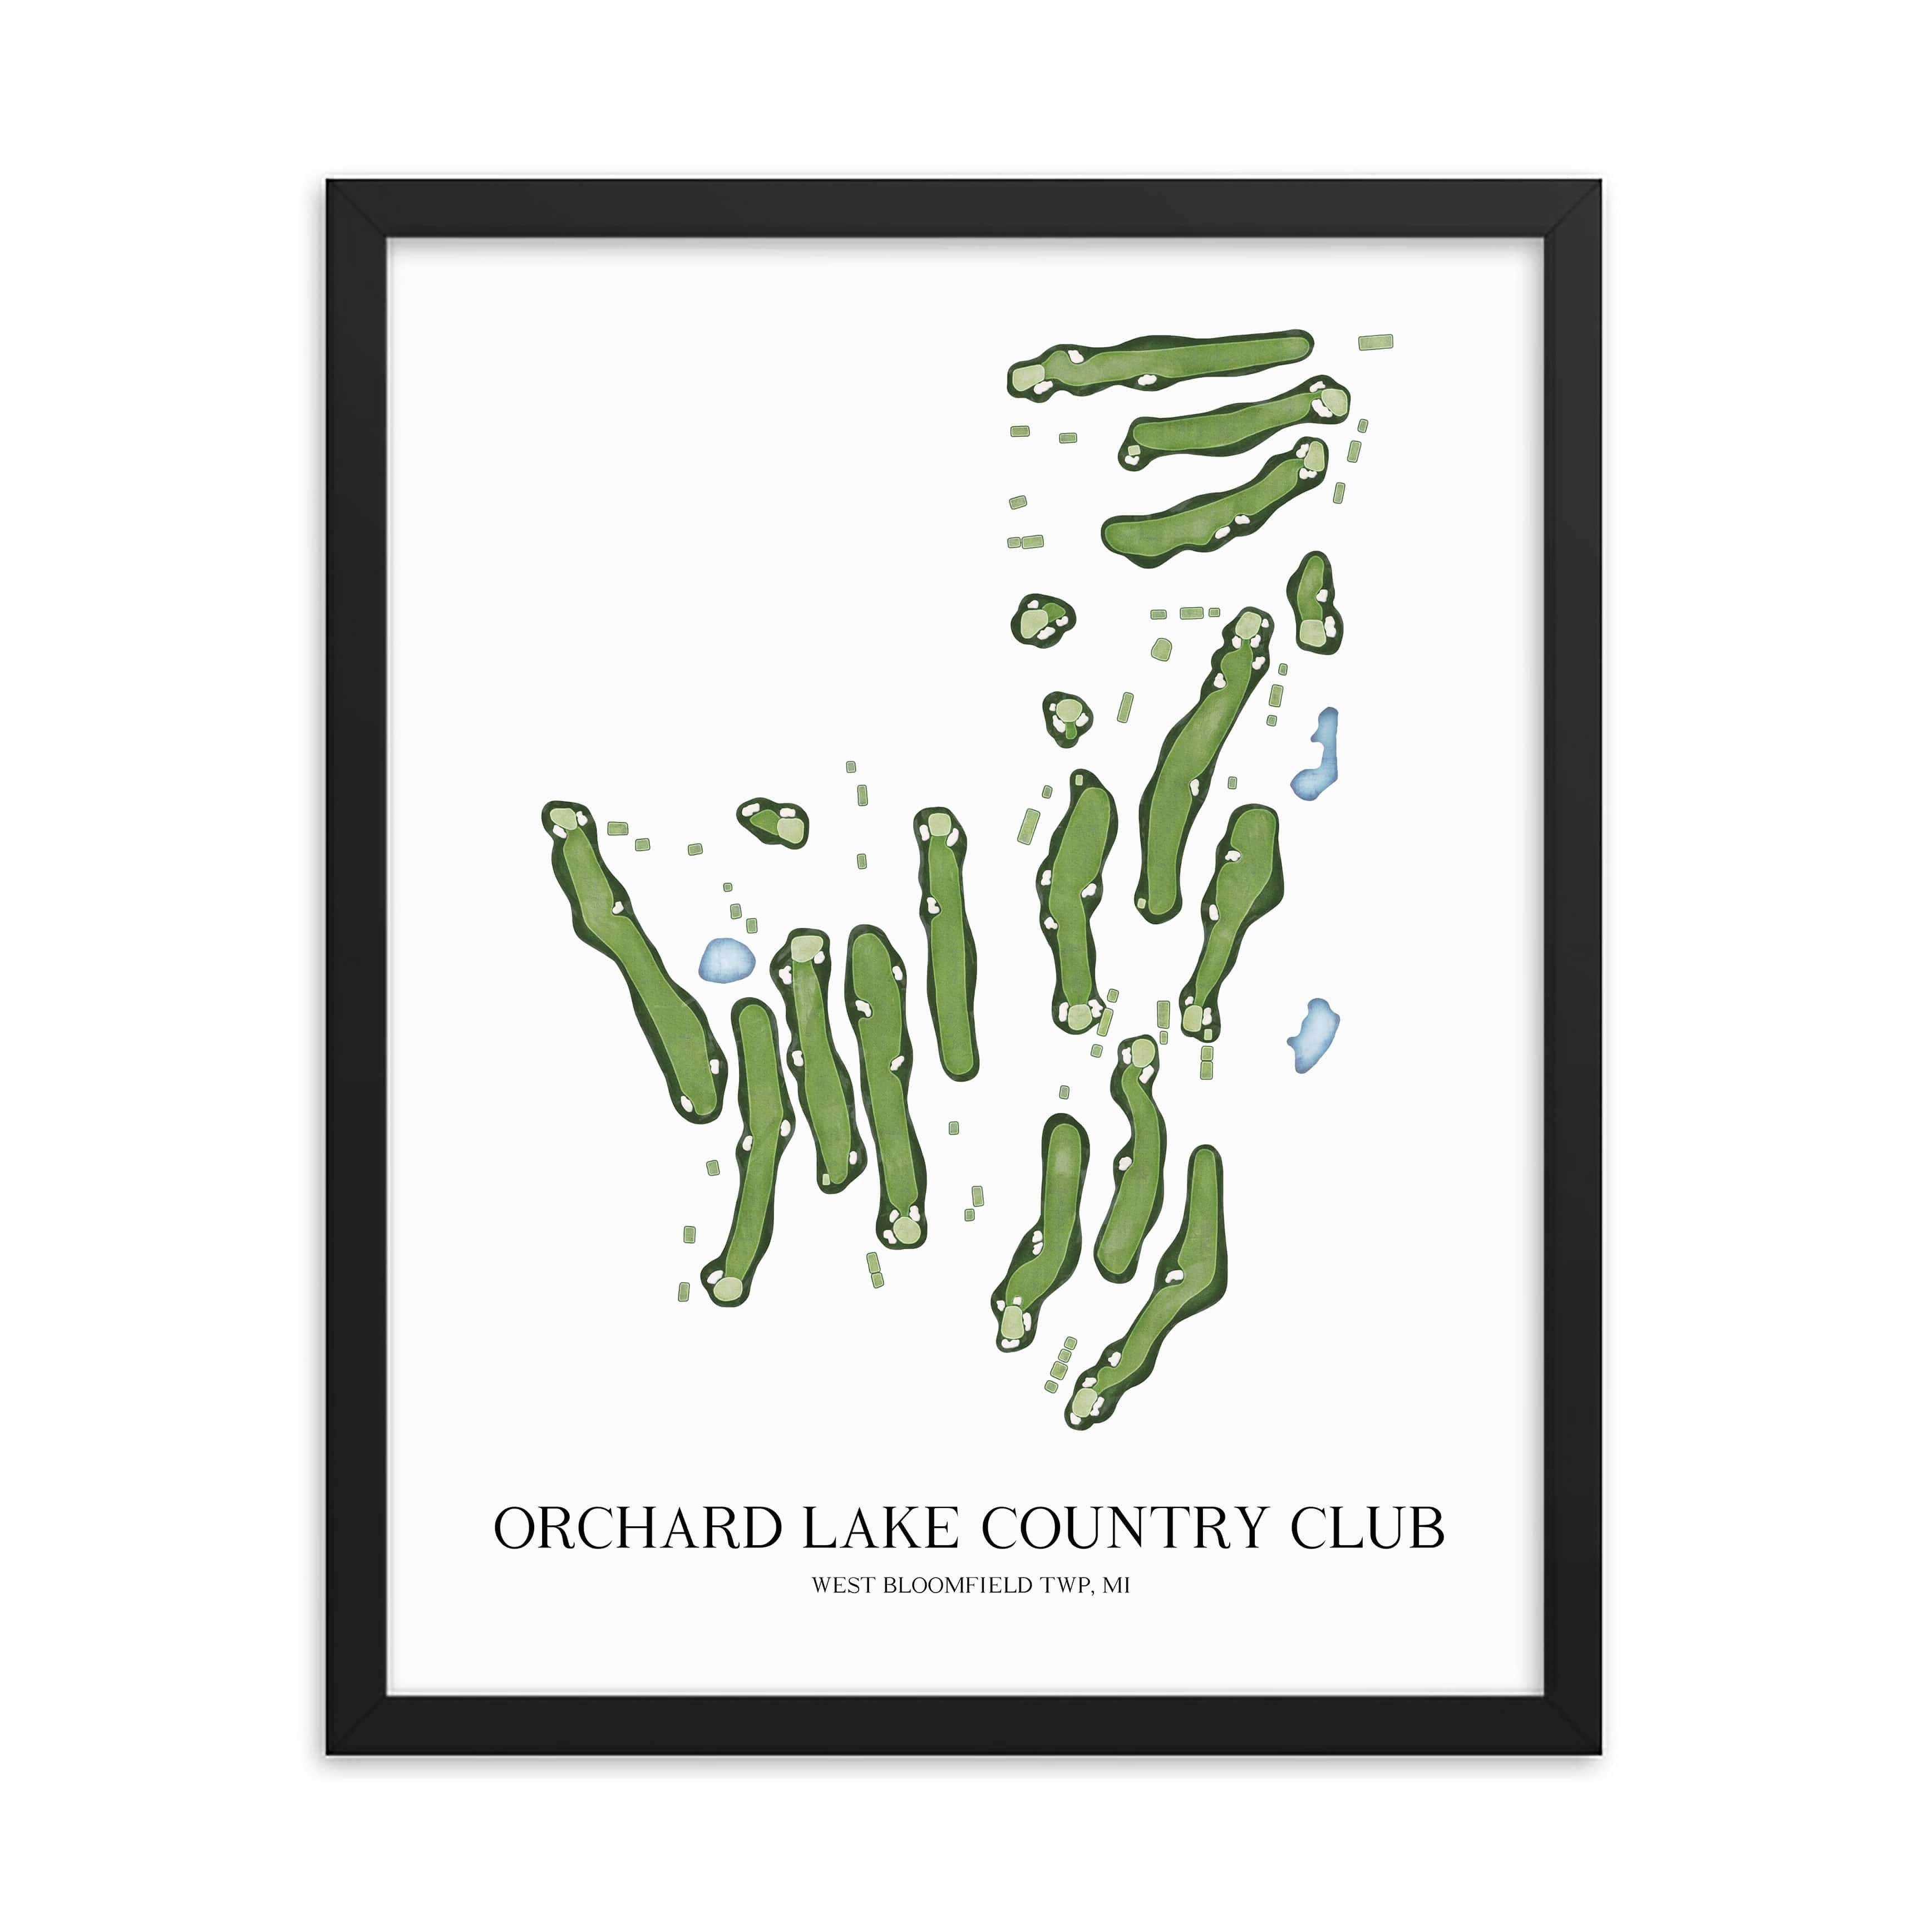 The 19th Hole Golf Shop - Golf Course Prints -  Orchard Lake Country Club Golf Course Map